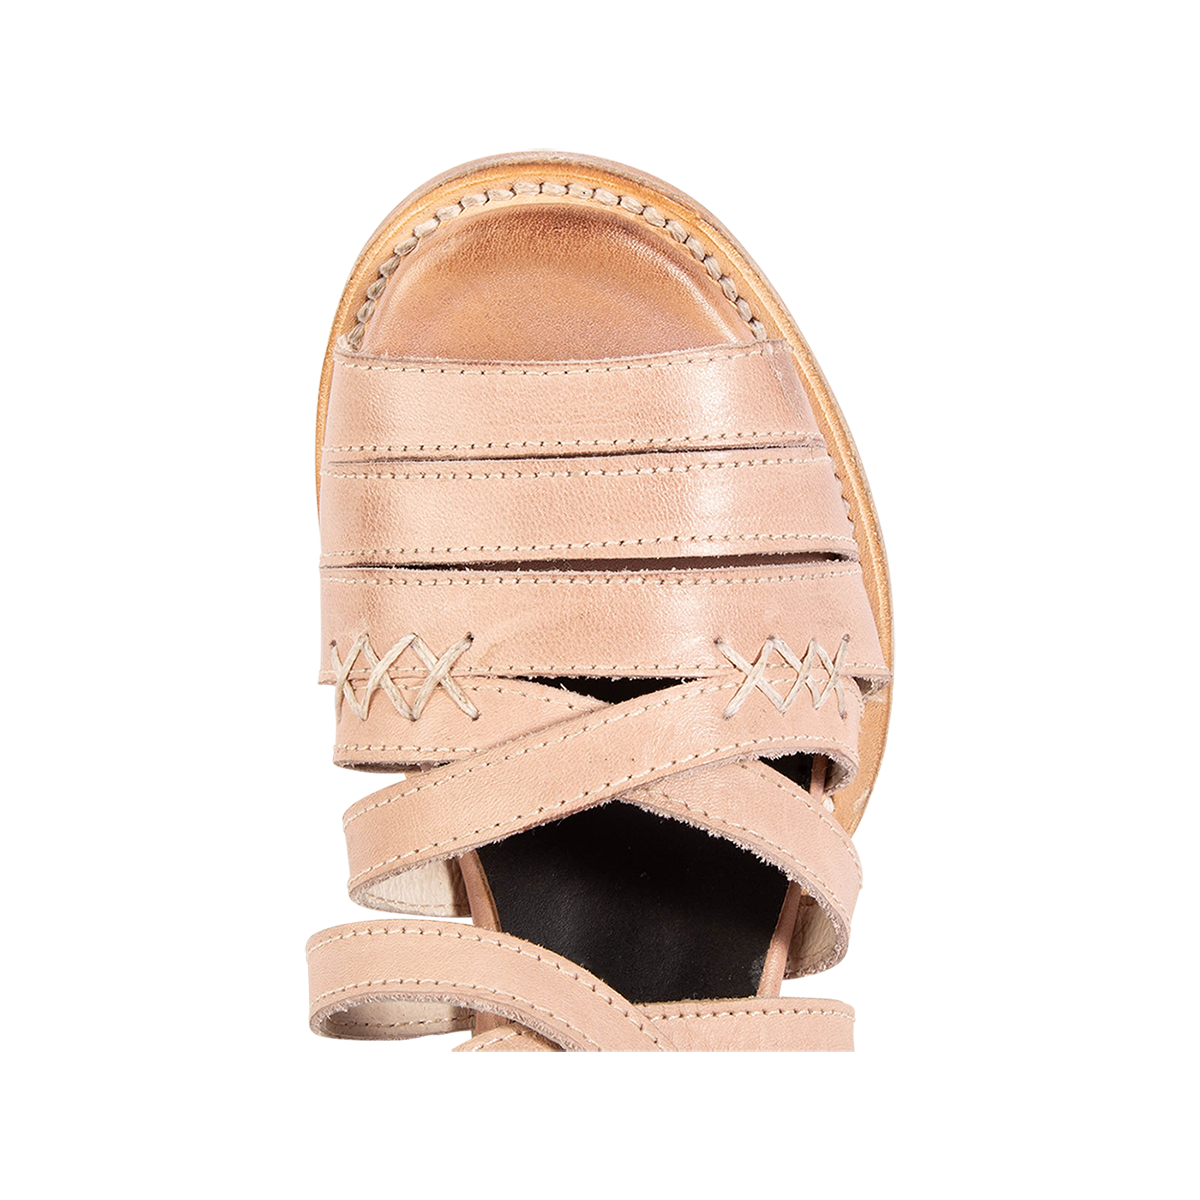 Top view showing a rounded toe and leather straps on FREEBIRD women's Makayla blush leather sandal